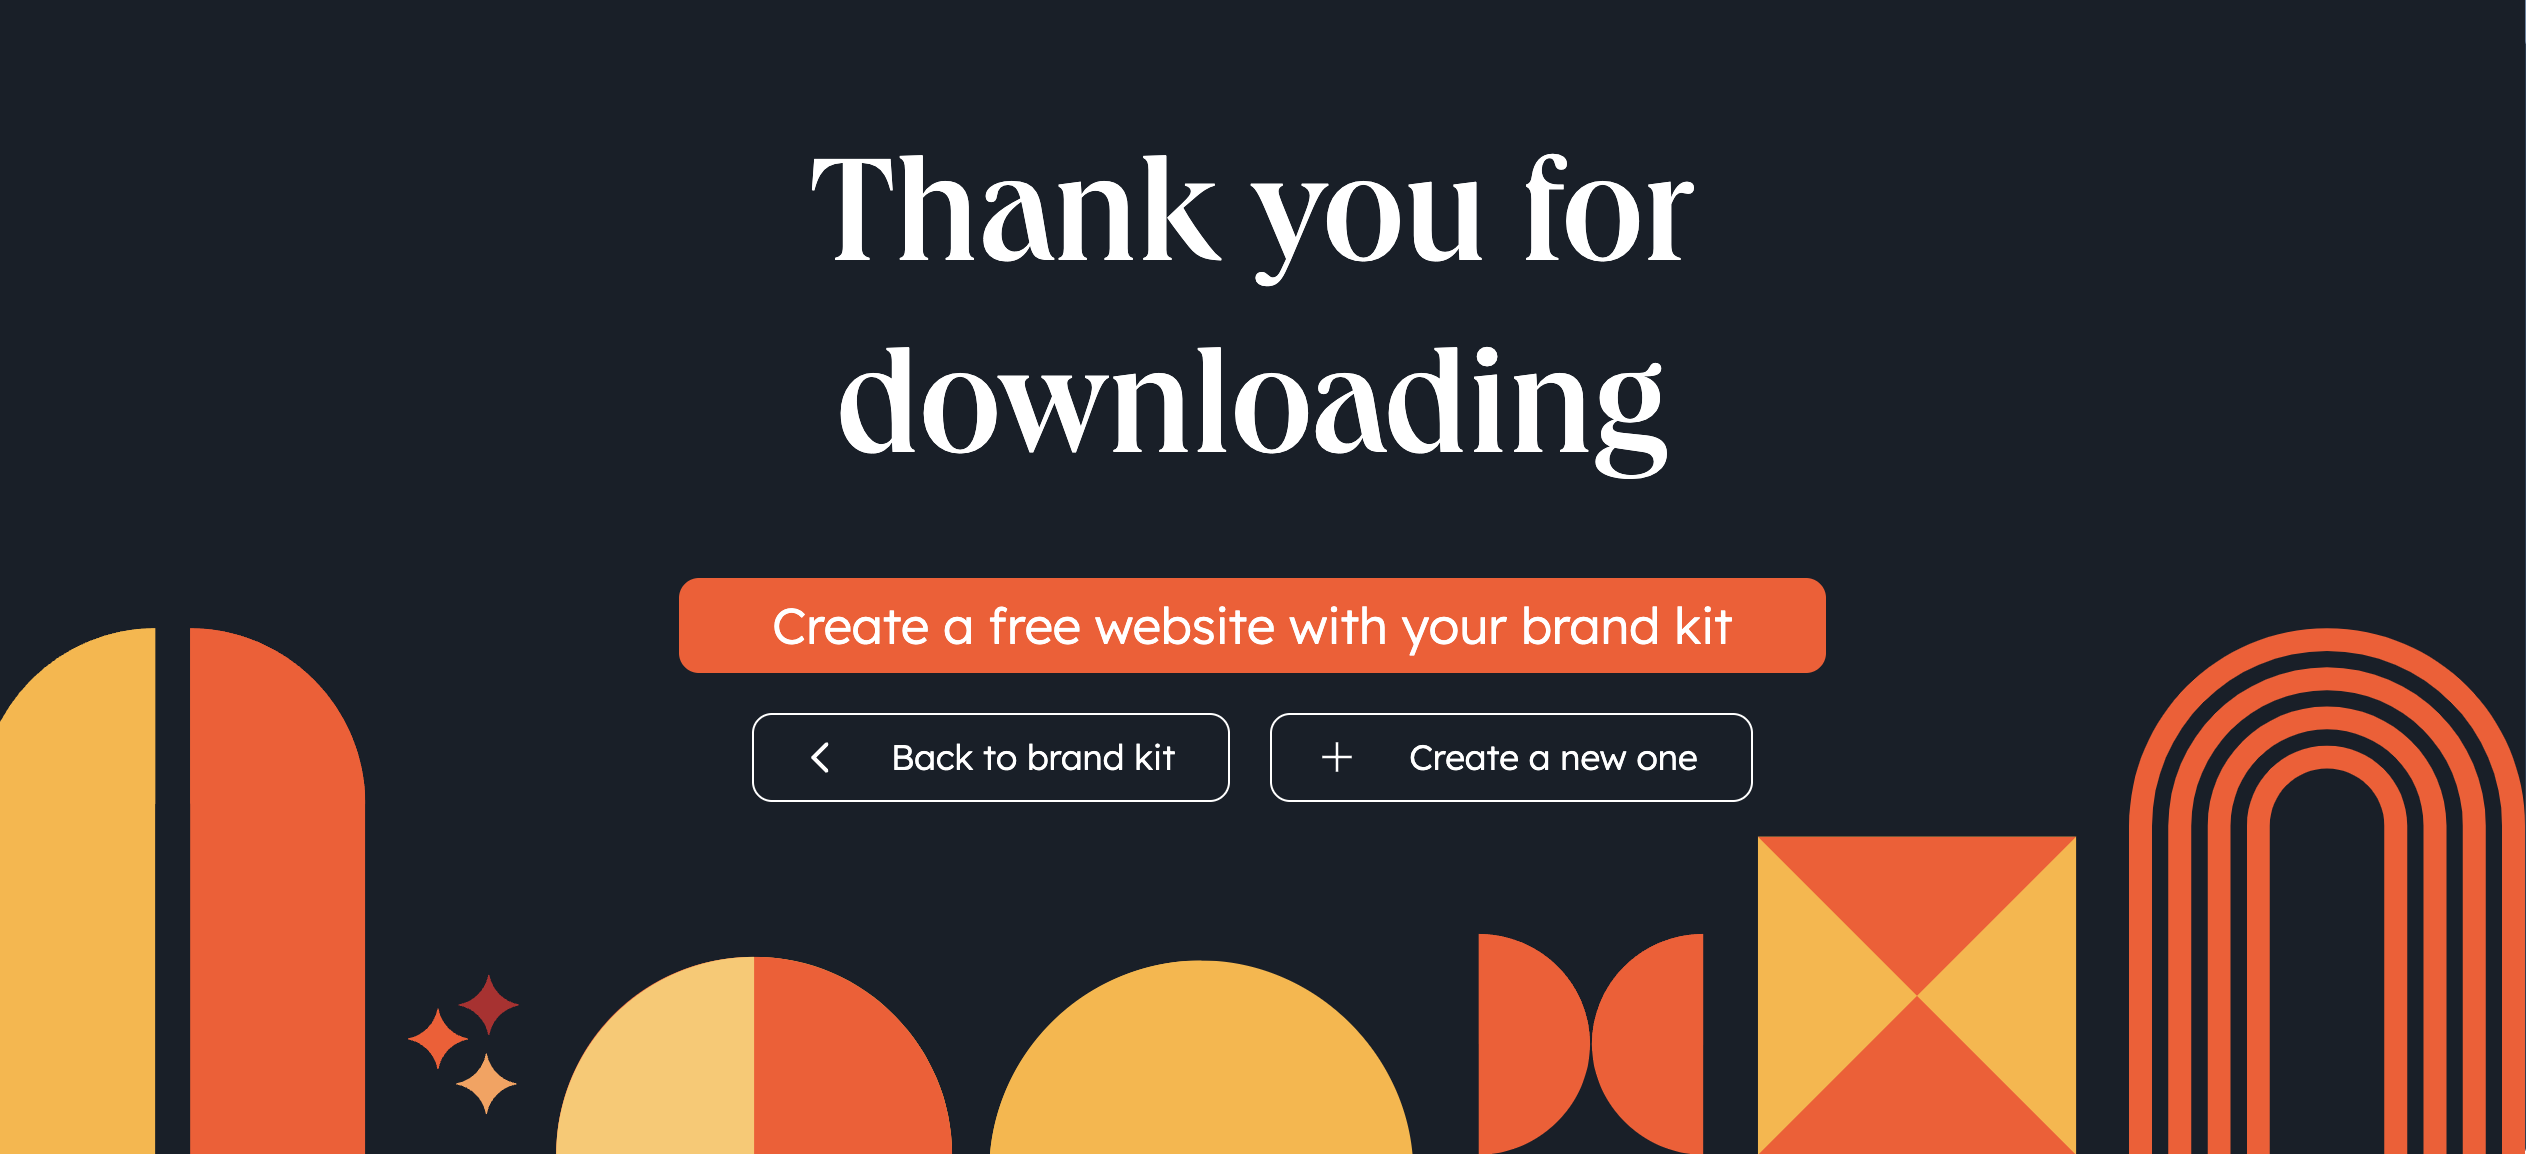 Download your brand kit for free.